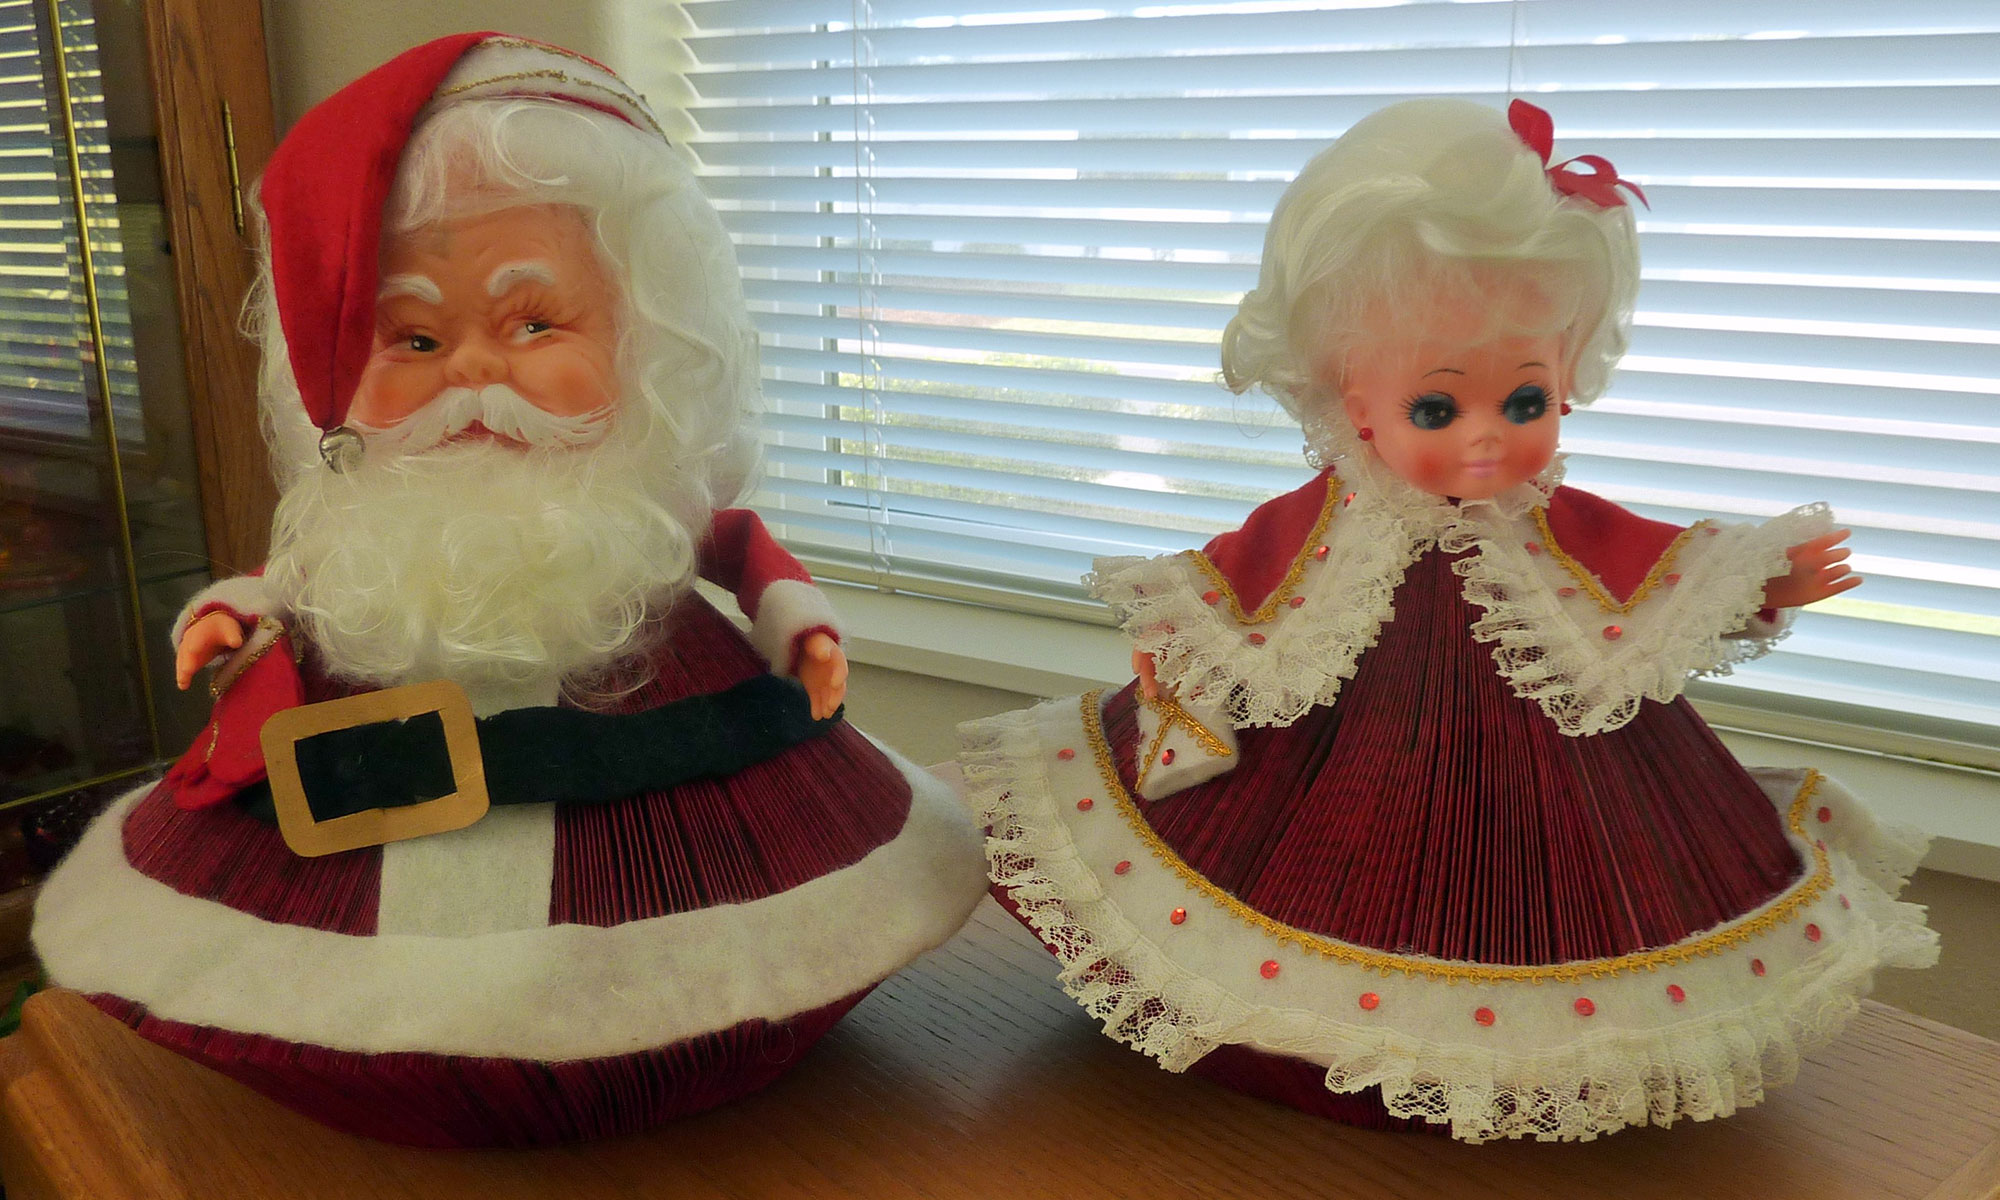 Santa and Mrs. Claus figurines